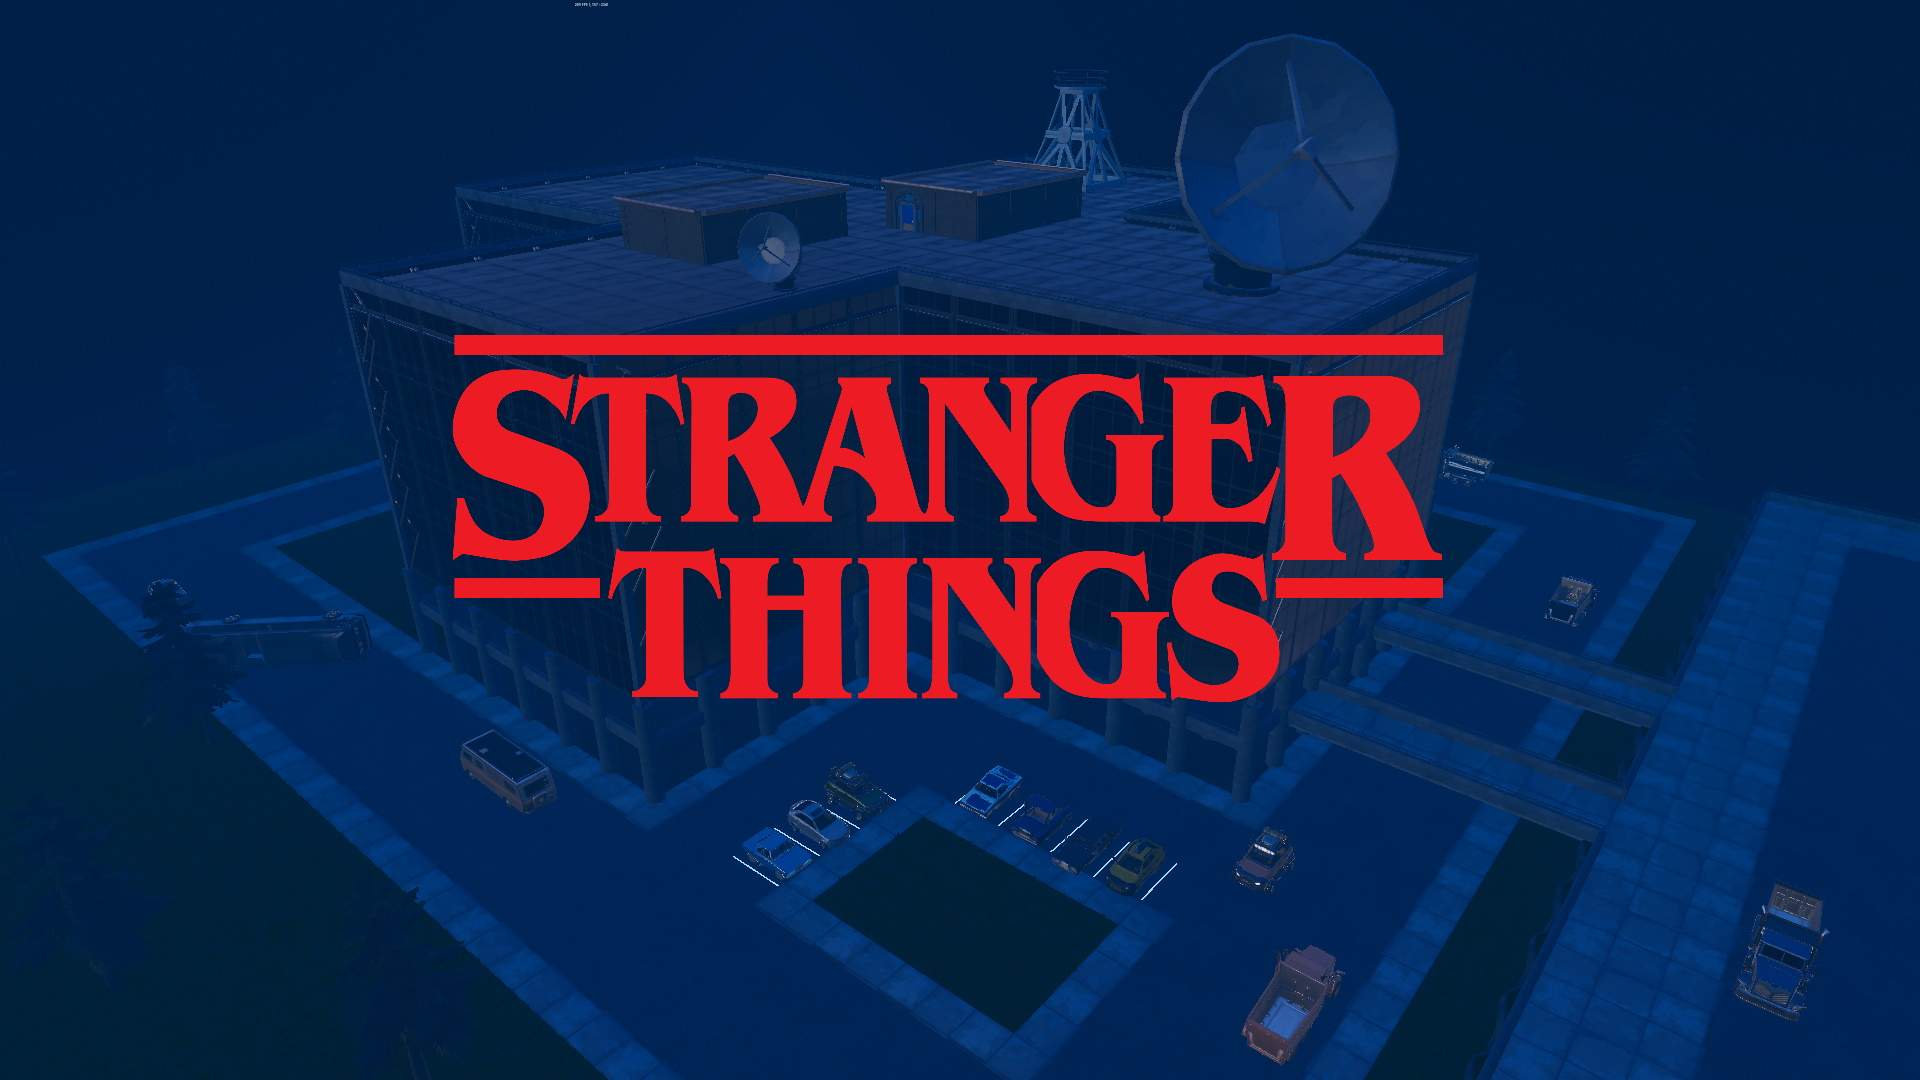 STRANGER THINGS FIND THE BUTTON